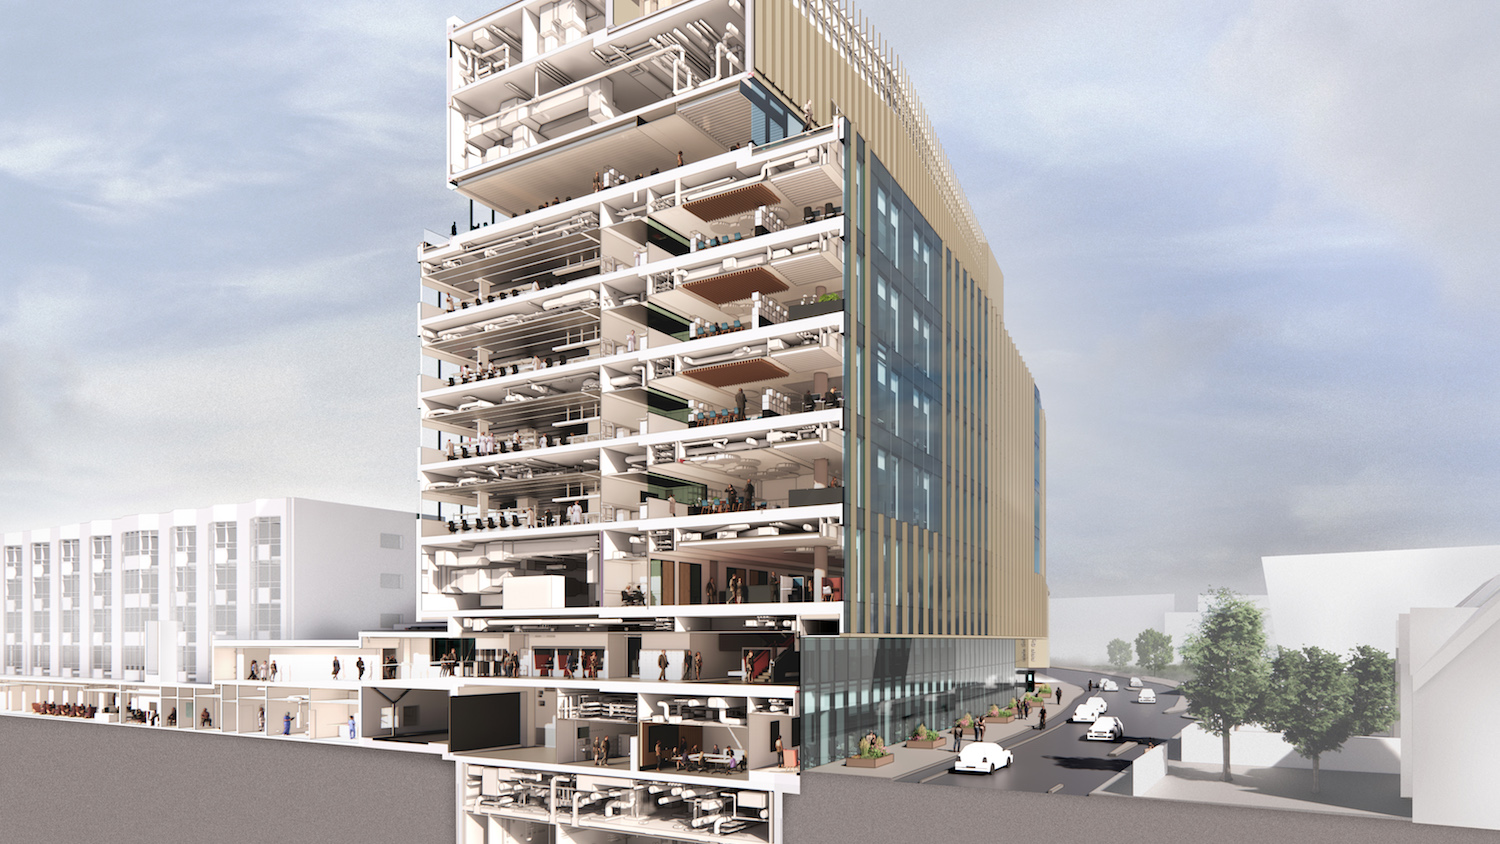 BIM image of the Paterson building from Arup and BDP